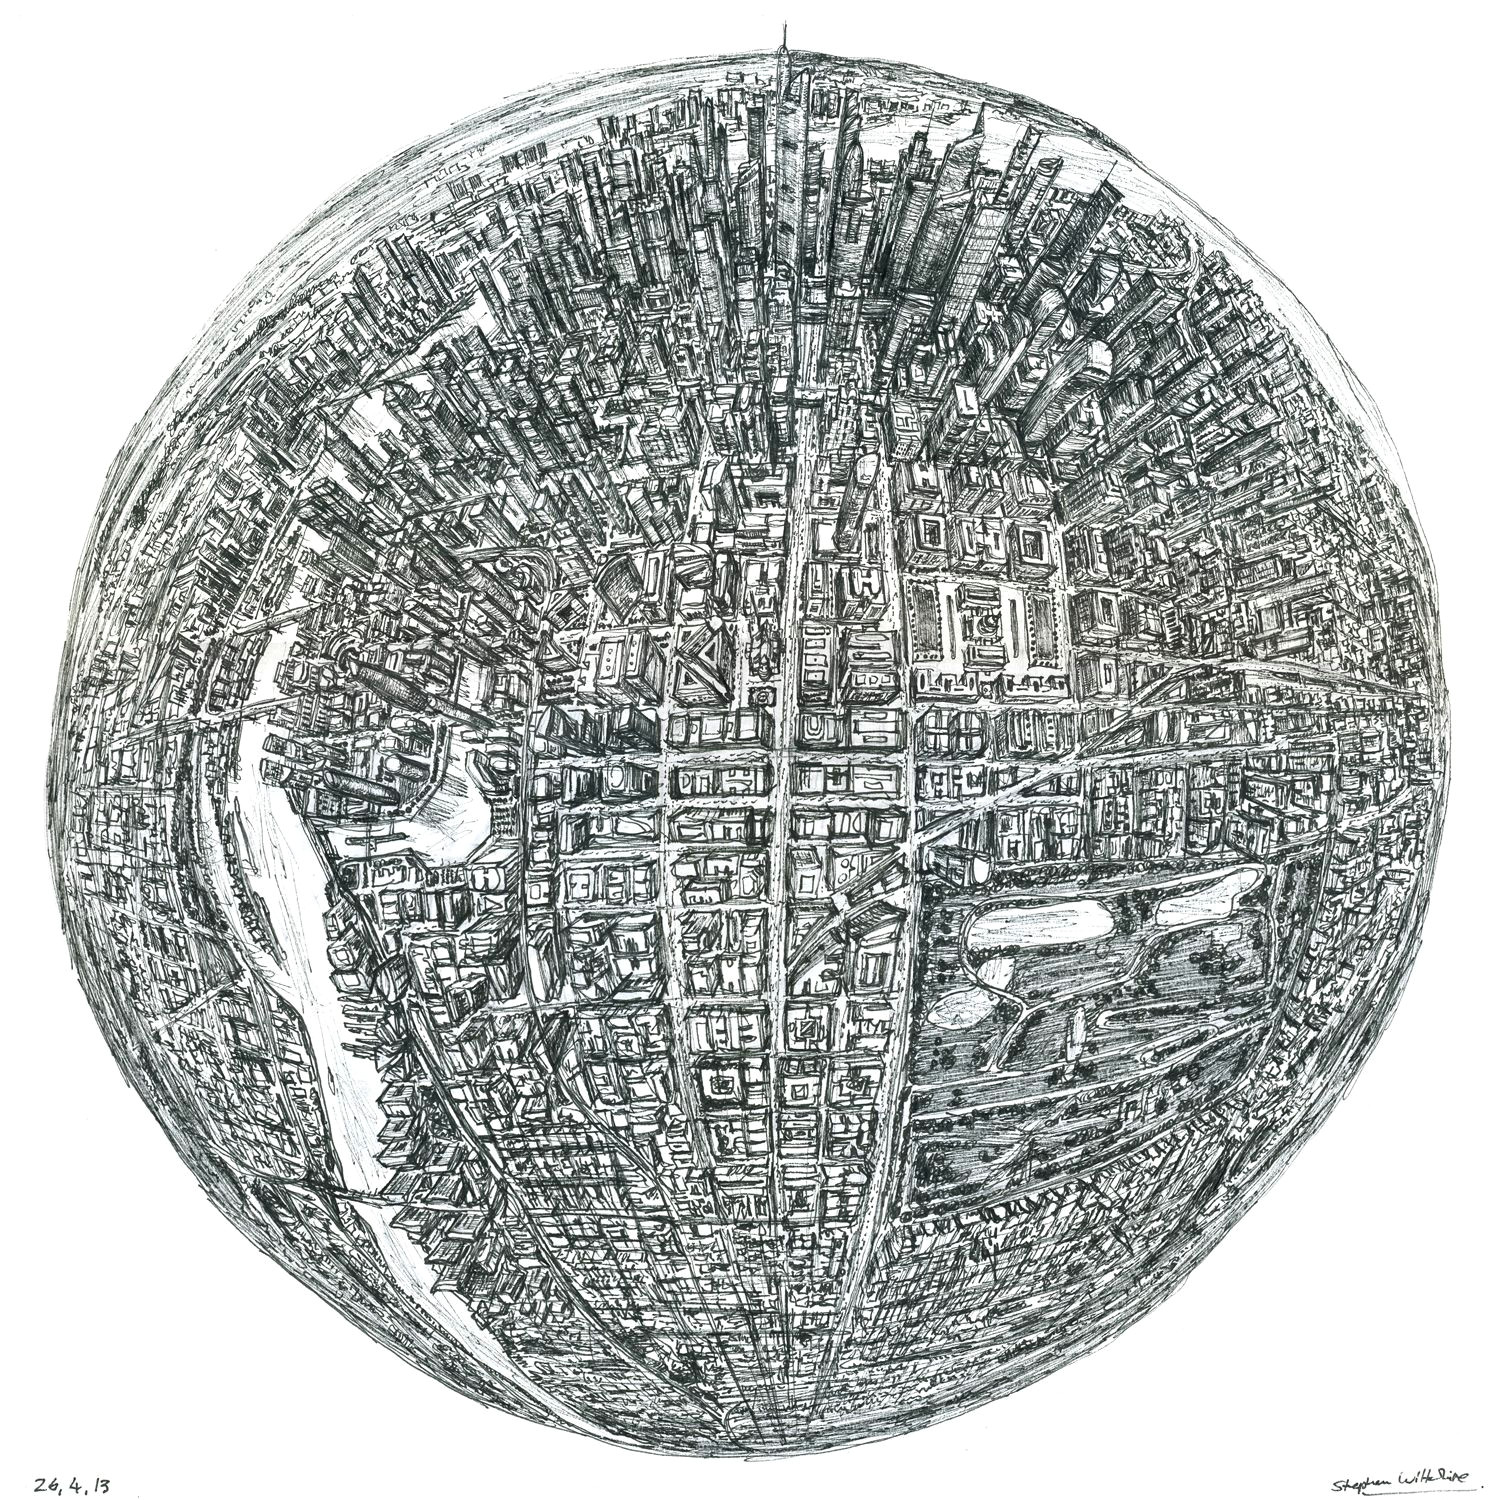 stephen wiltshire s new creation titled globe of imagination is based on a 360 degree birds eye view depicting a city which only exists in his mind